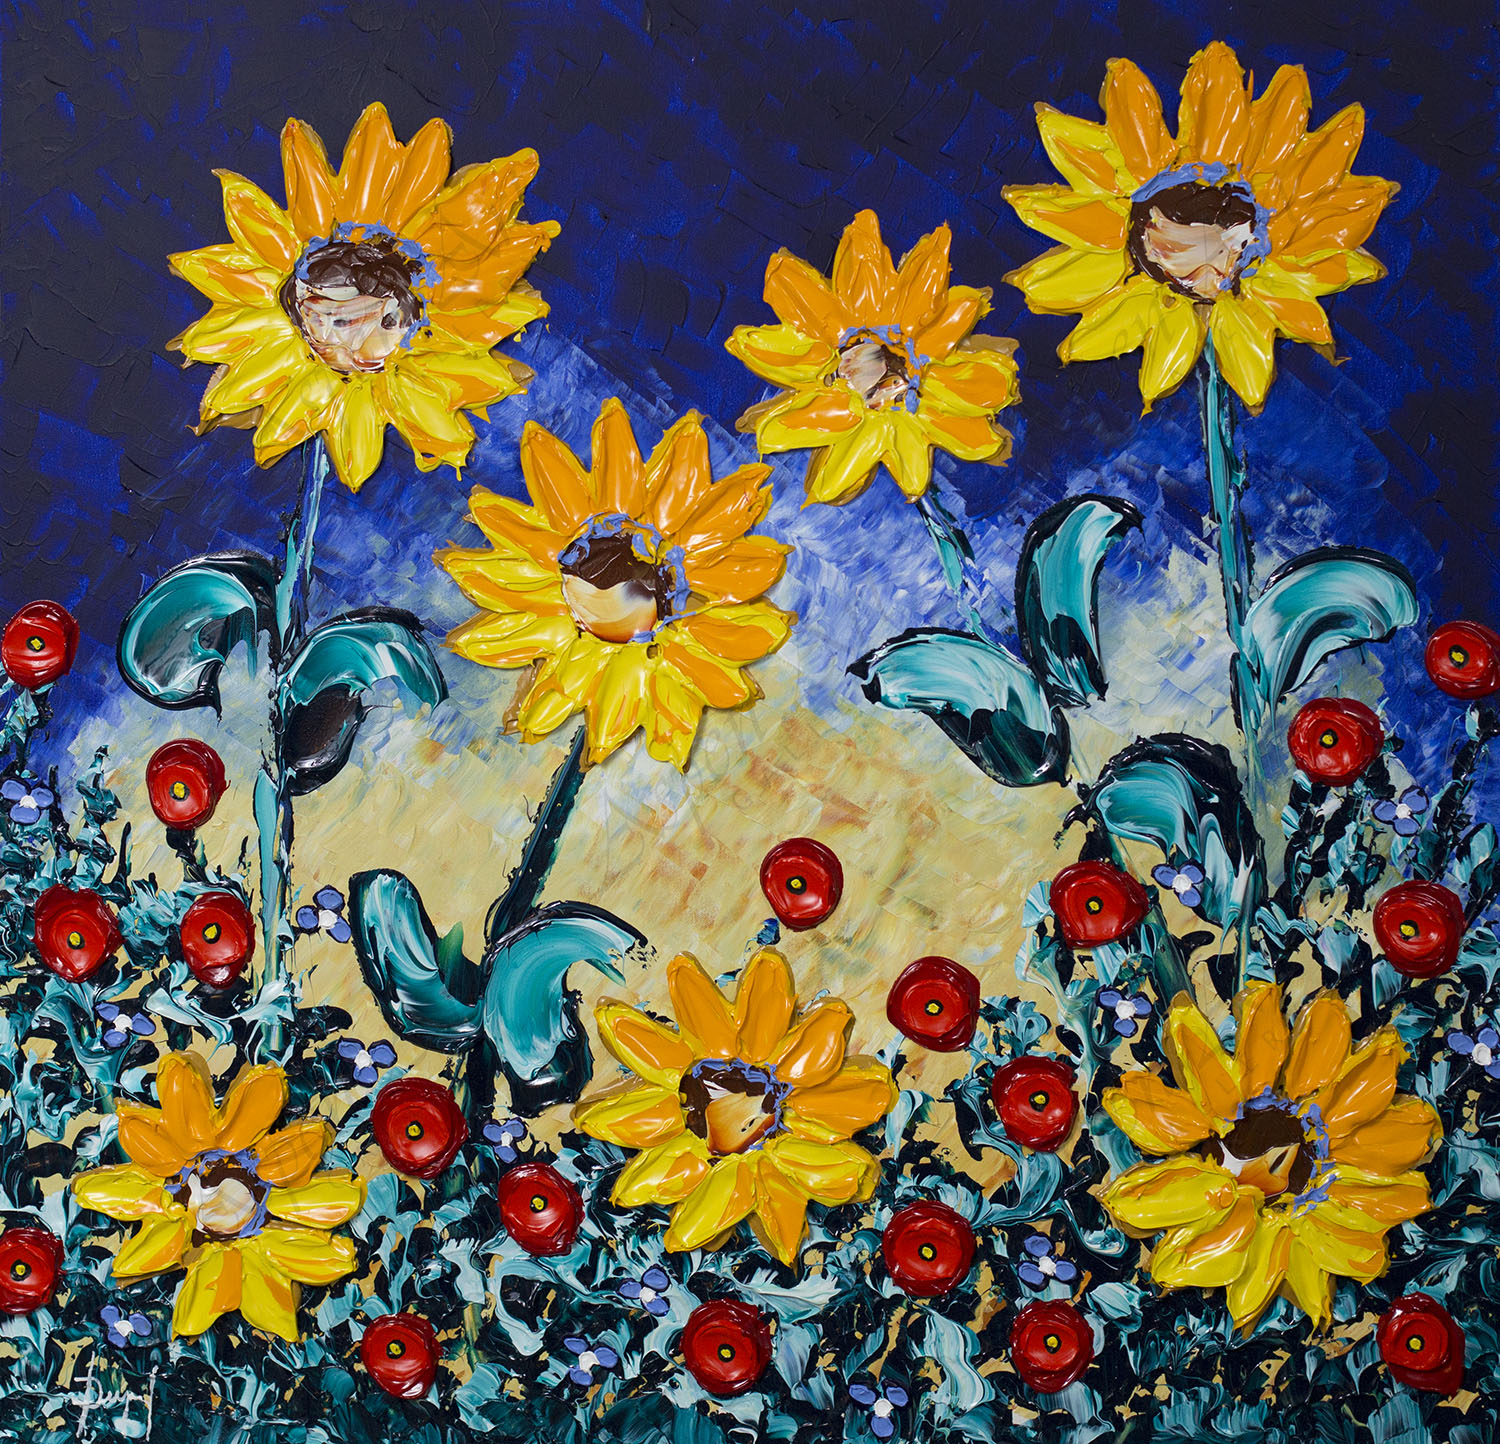 Bright Sunflowers of Delightful Meadows 36x36